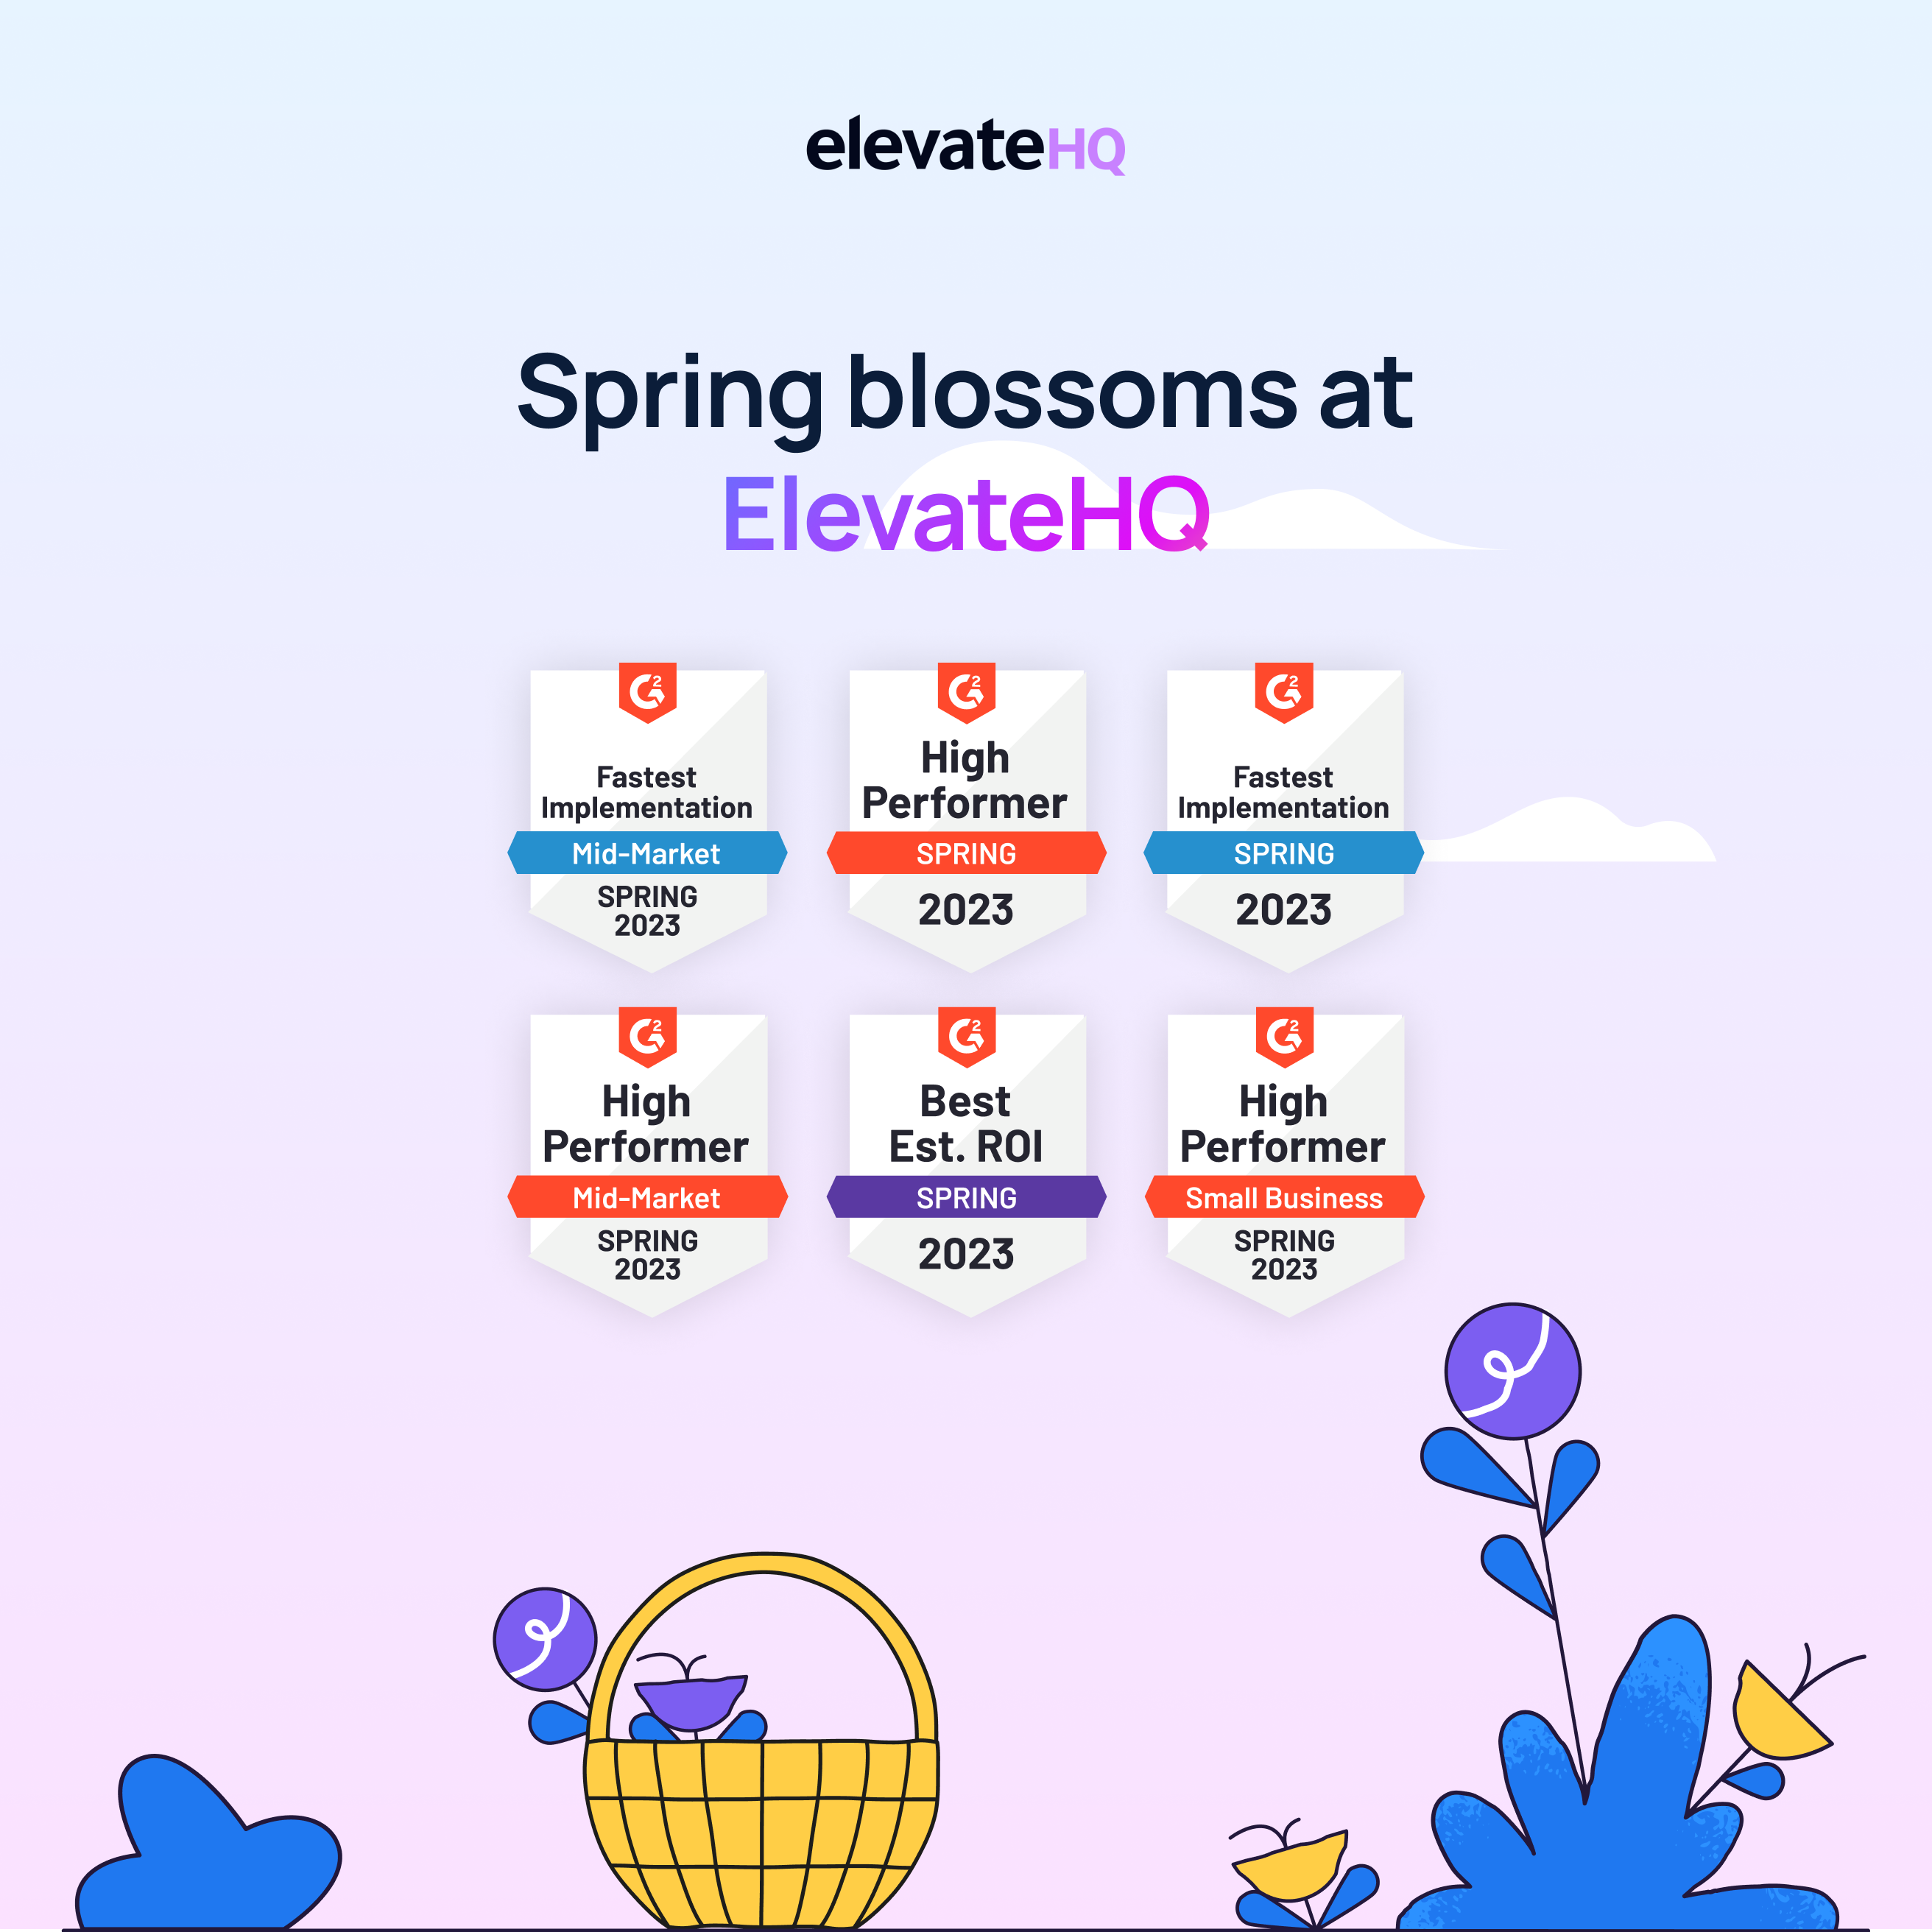 ElevateHQ’s badge rolodex for the spring